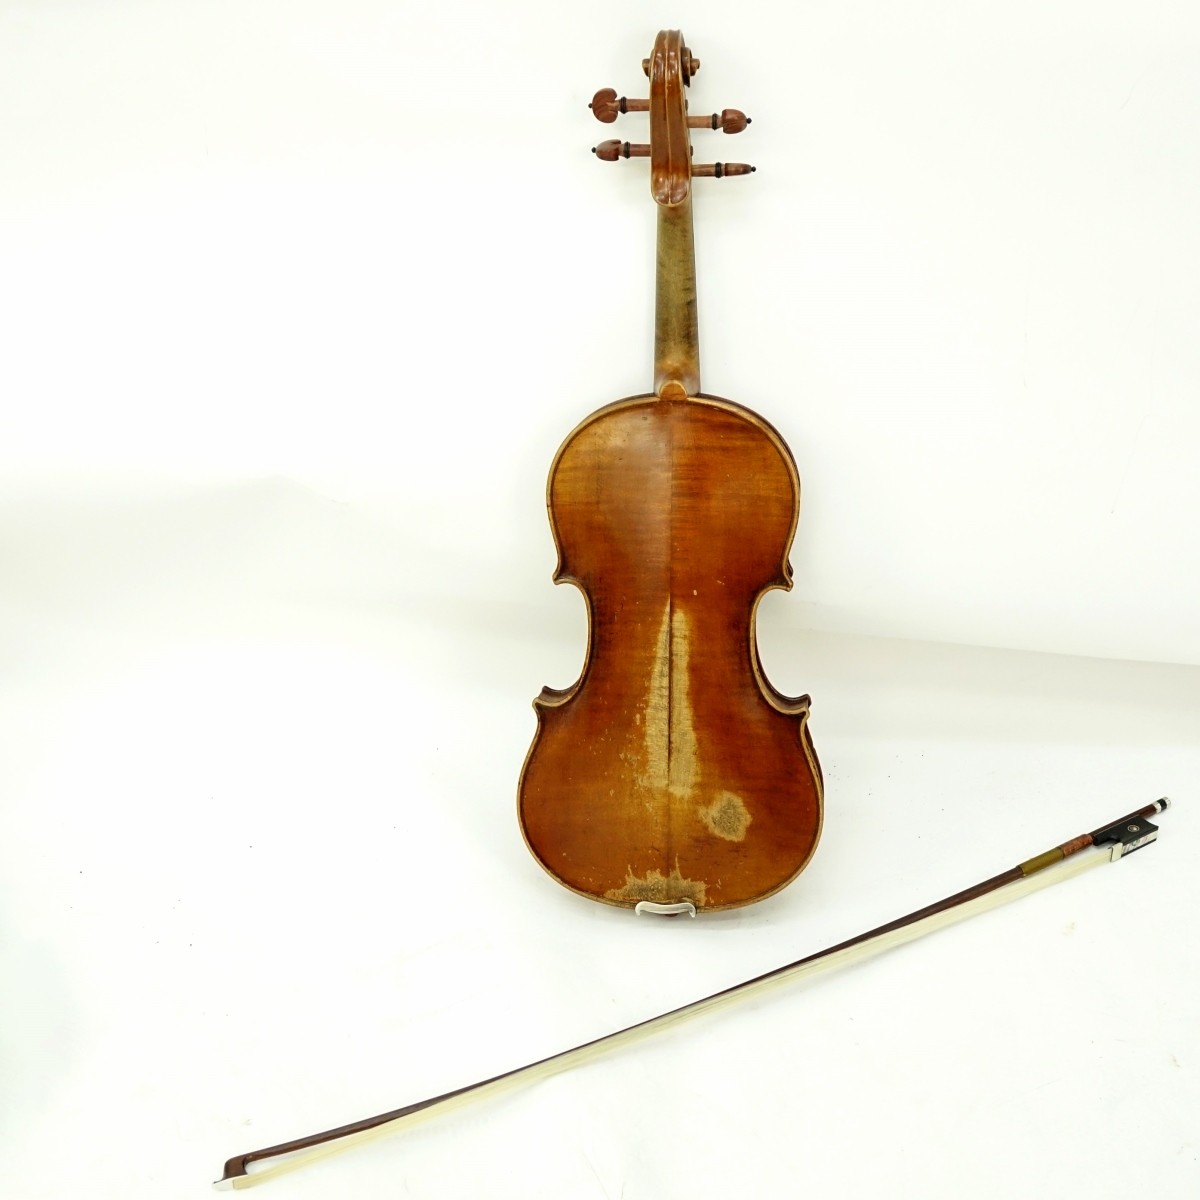 Giuseppe Pedrazzini Violin with Carrying Case